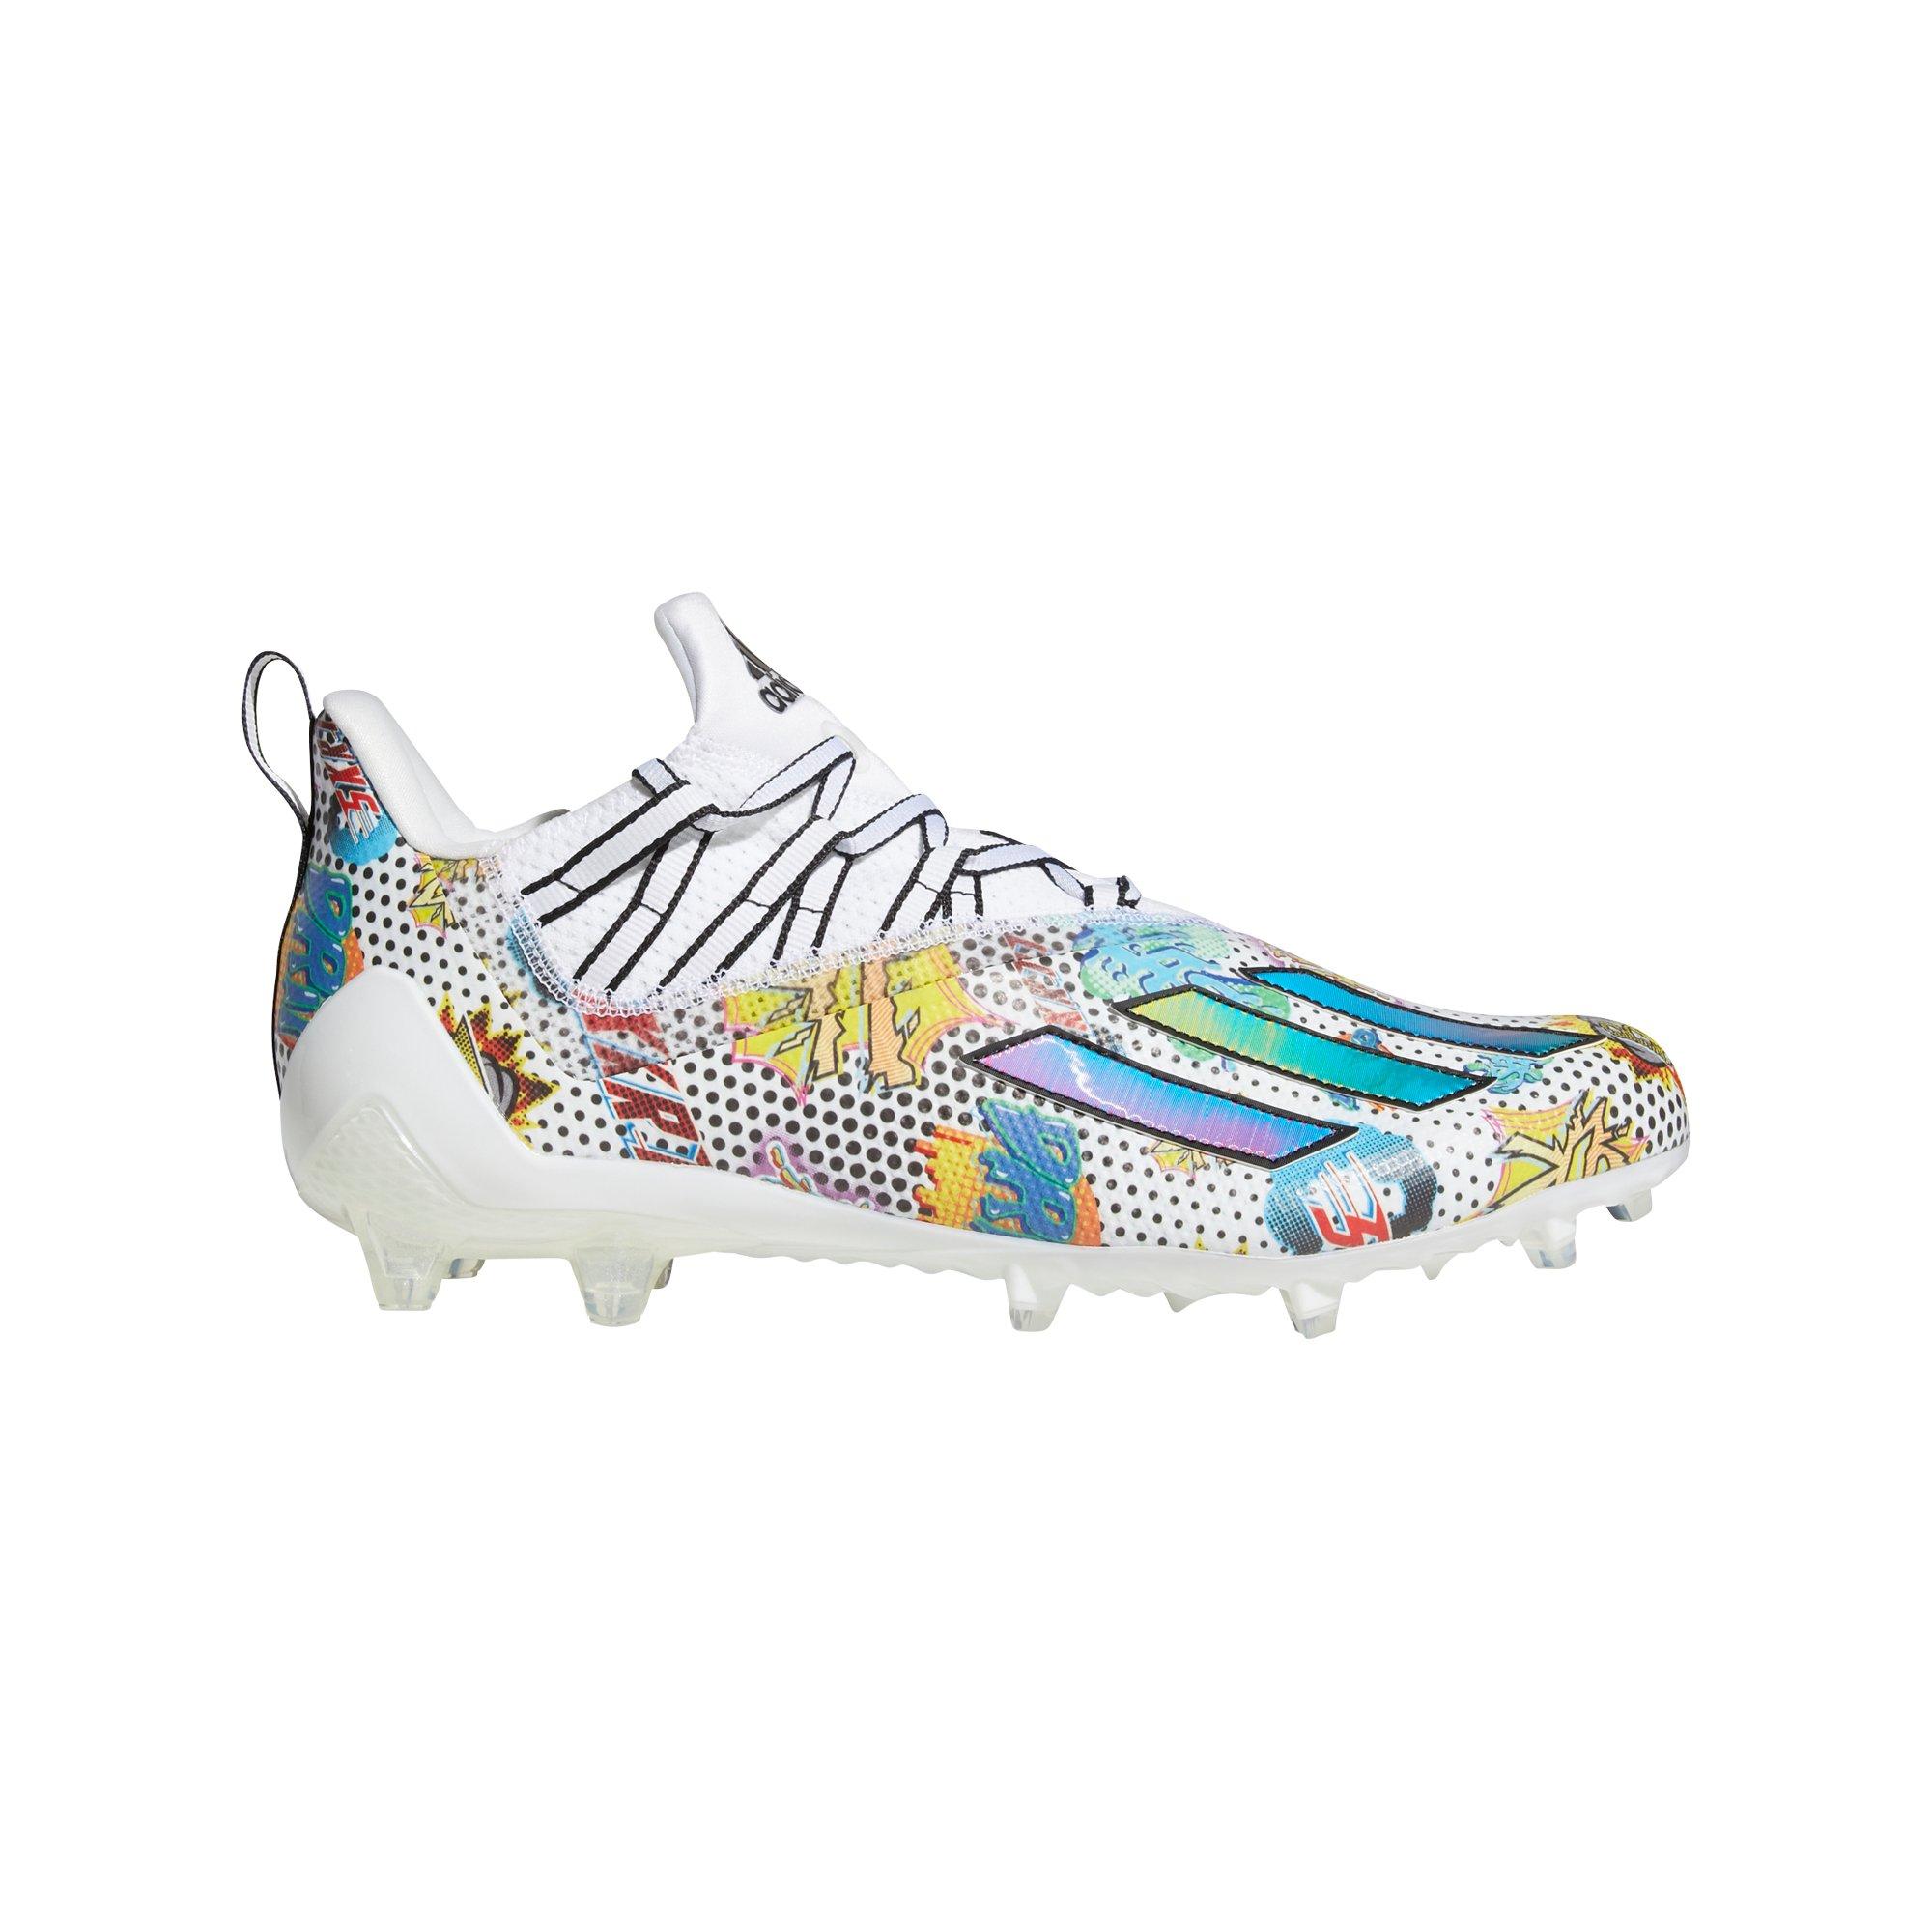 multi color football cleats